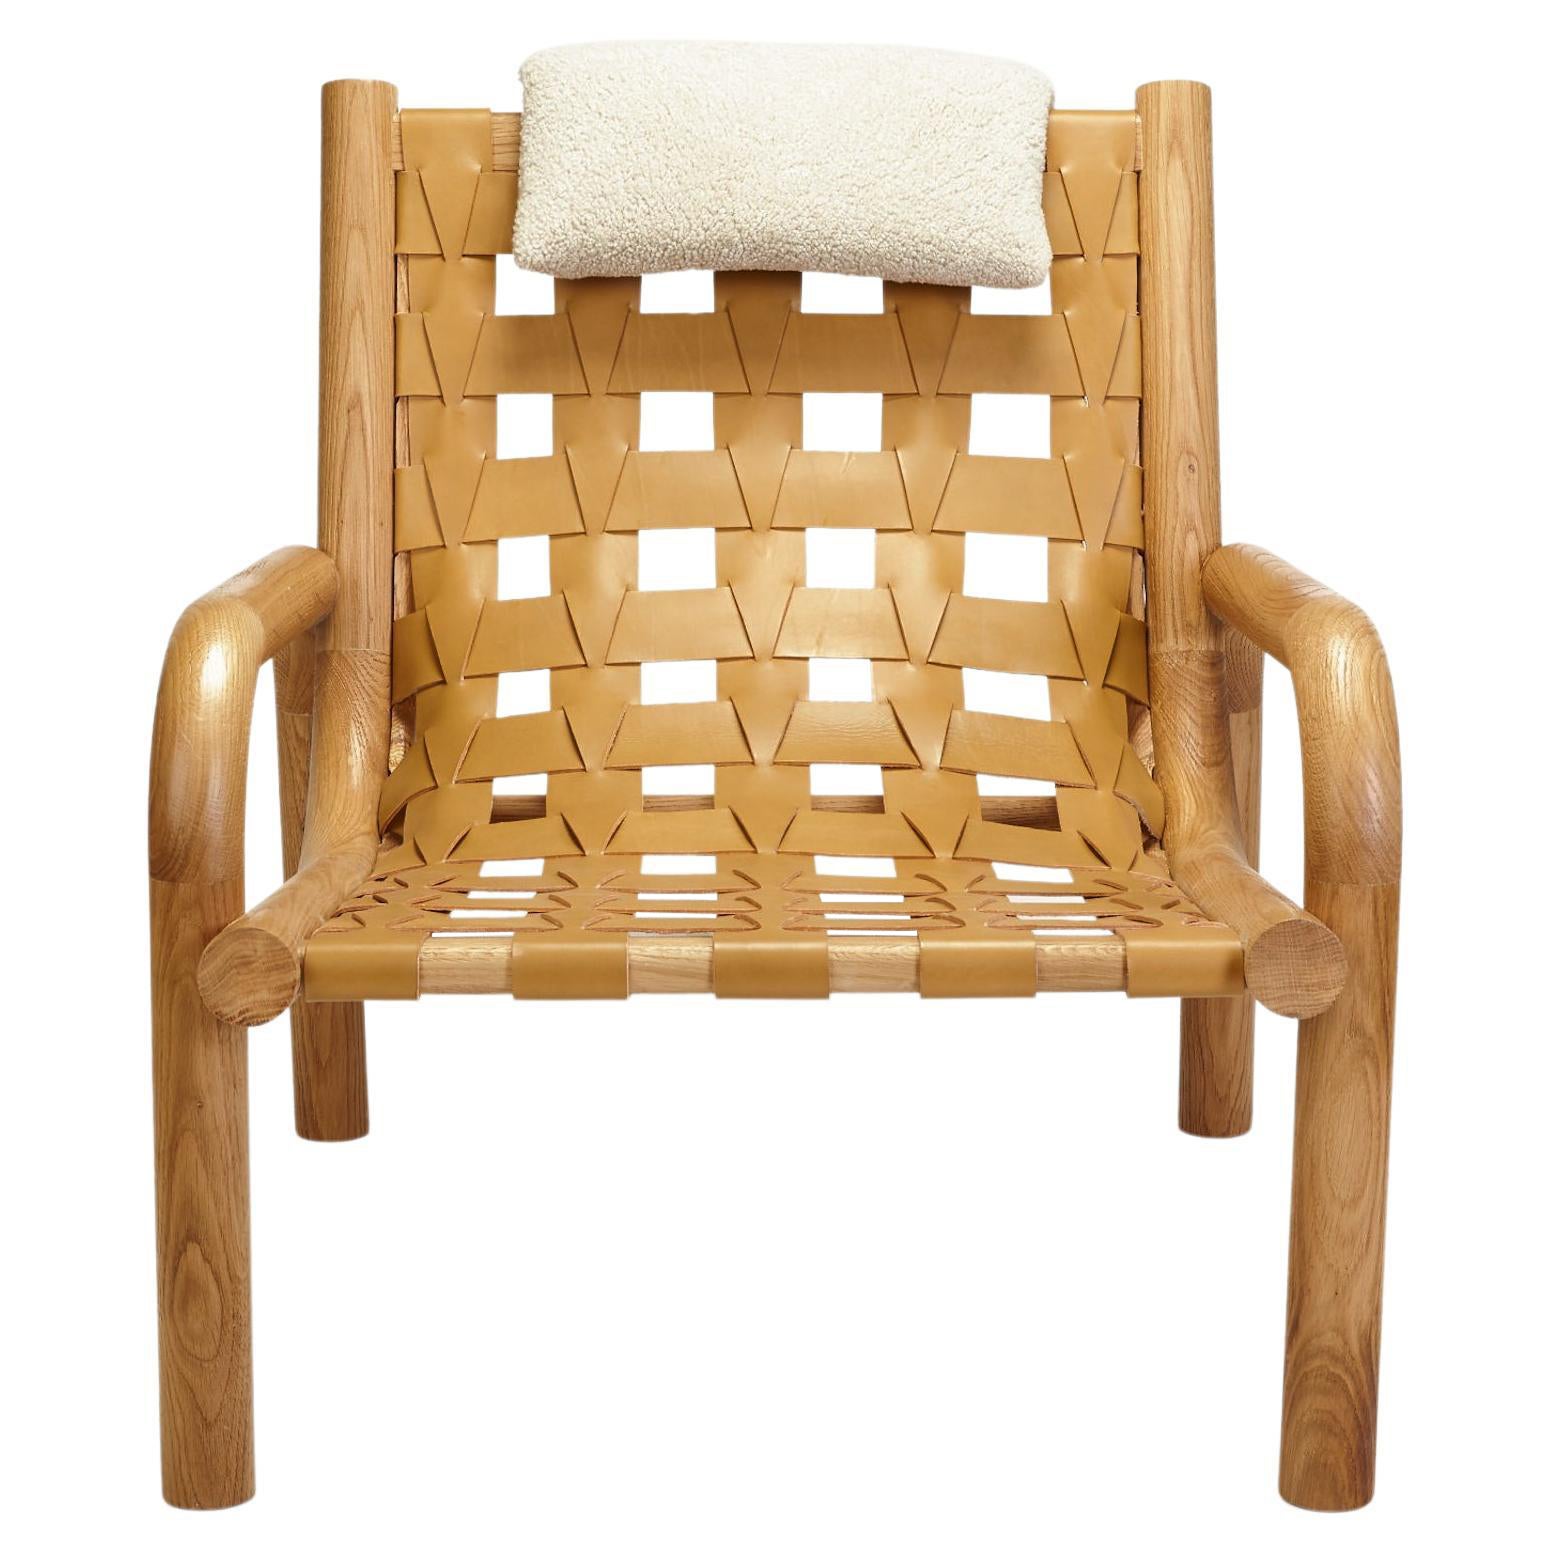 Ginga Leather Armchair, Natural Solid Oak, Handcrafted in Portugal by Duistt